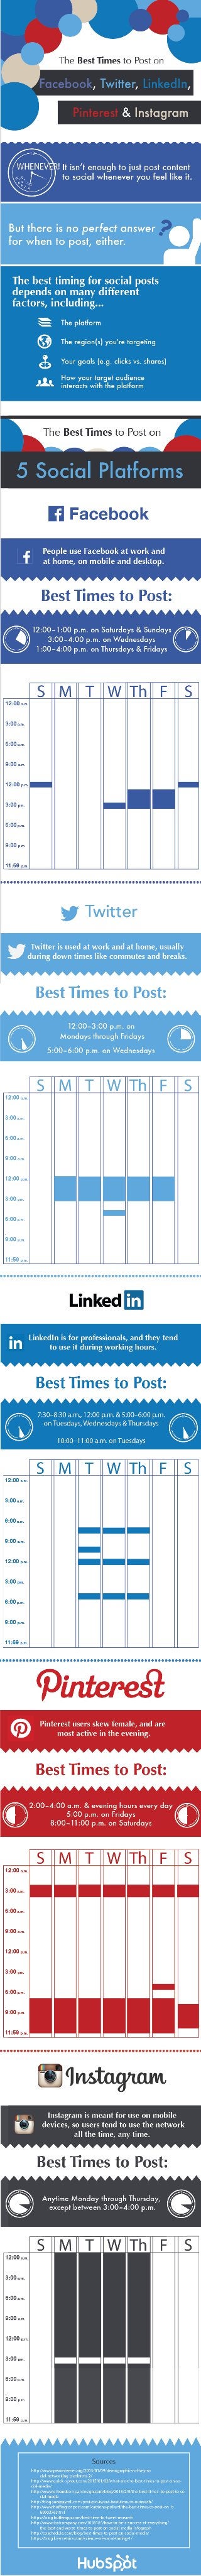 The Best Times to Post on Facebook, Twitter, LinkedIn & Other Social Media Sites [Hubspot Infographic]